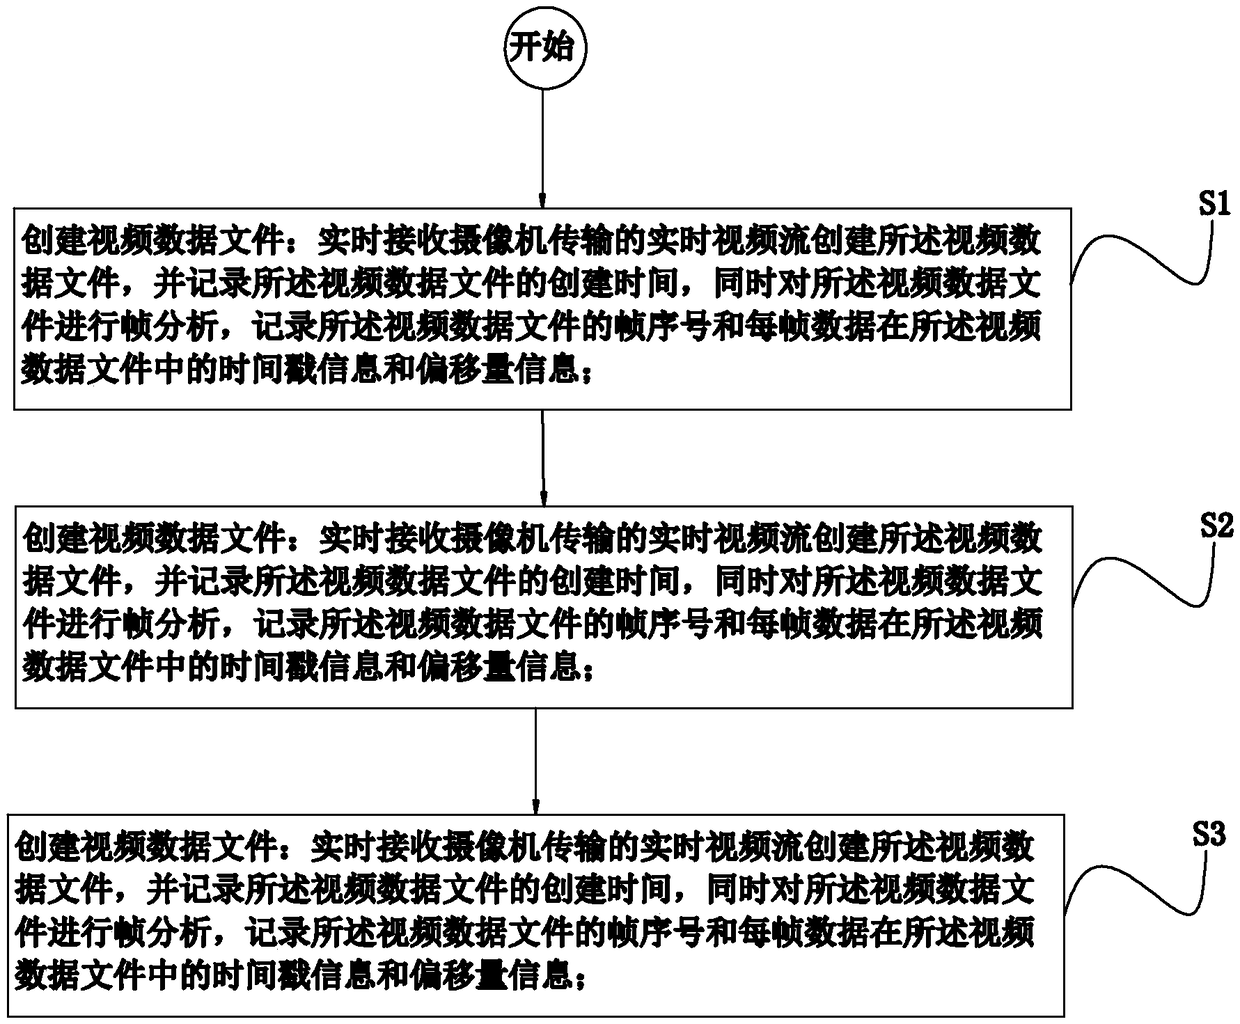 History video file format storage method used for monitoring industry and system